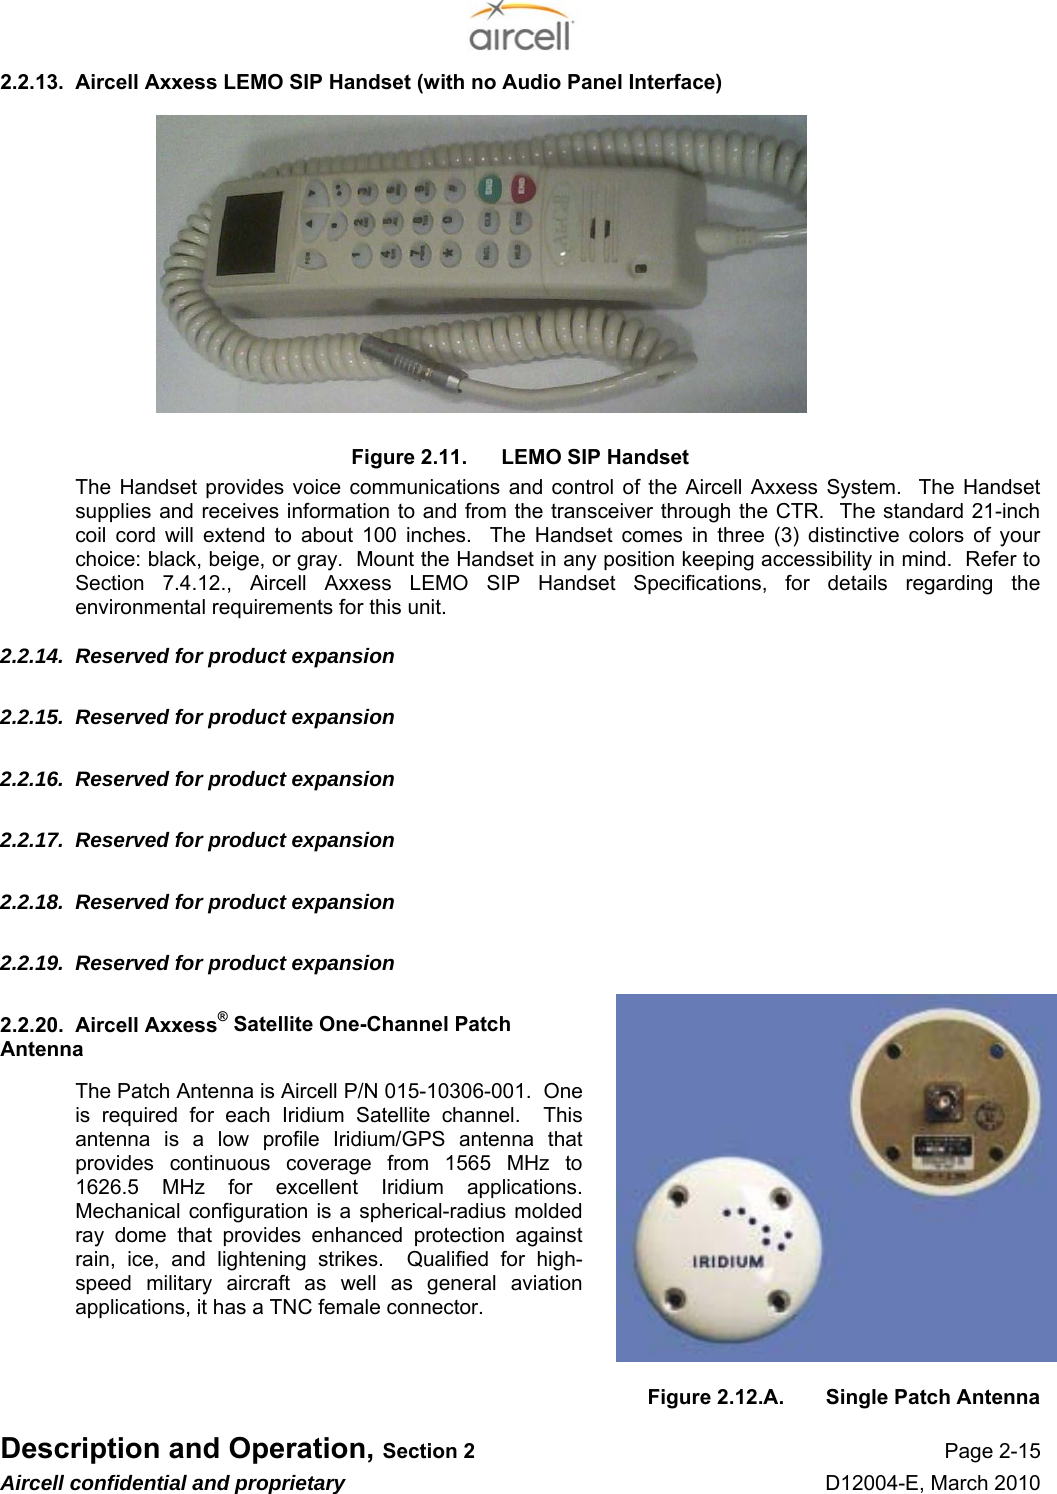  Description and Operation, Section 2 Page 2-15 Aircell confidential and proprietary D12004-E, March 2010 2.2.13.  Aircell Axxess LEMO SIP Handset (with no Audio Panel Interface)            Figure 2.11.  LEMO SIP Handset The Handset provides voice communications and control of the Aircell Axxess System.  The Handset supplies and receives information to and from the transceiver through the CTR.  The standard 21-inch coil cord will extend to about 100 inches.  The Handset comes in three (3) distinctive colors of your choice: black, beige, or gray.  Mount the Handset in any position keeping accessibility in mind.  Refer to Section 7.4.12., Aircell Axxess LEMO SIP Handset Specifications, for details regarding the environmental requirements for this unit. 2.2.14.  Reserved for product expansion 2.2.15.  Reserved for product expansion 2.2.16.  Reserved for product expansion 2.2.17.  Reserved for product expansion 2.2.18.  Reserved for product expansion 2.2.19.  Reserved for product expansion 2.2.20.  Aircell Axxess® Satellite One-Channel Patch Antenna The Patch Antenna is Aircell P/N 015-10306-001.  One is required for each Iridium Satellite channel.  This antenna is a low profile Iridium/GPS antenna that provides continuous coverage from 1565 MHz to 1626.5 MHz for excellent Iridium applications.  Mechanical configuration is a spherical-radius molded ray dome that provides enhanced protection against rain, ice, and lightening strikes.  Qualified for high-speed military aircraft as well as general aviation applications, it has a TNC female connector.   Figure 2.12.A.  Single Patch Antenna 